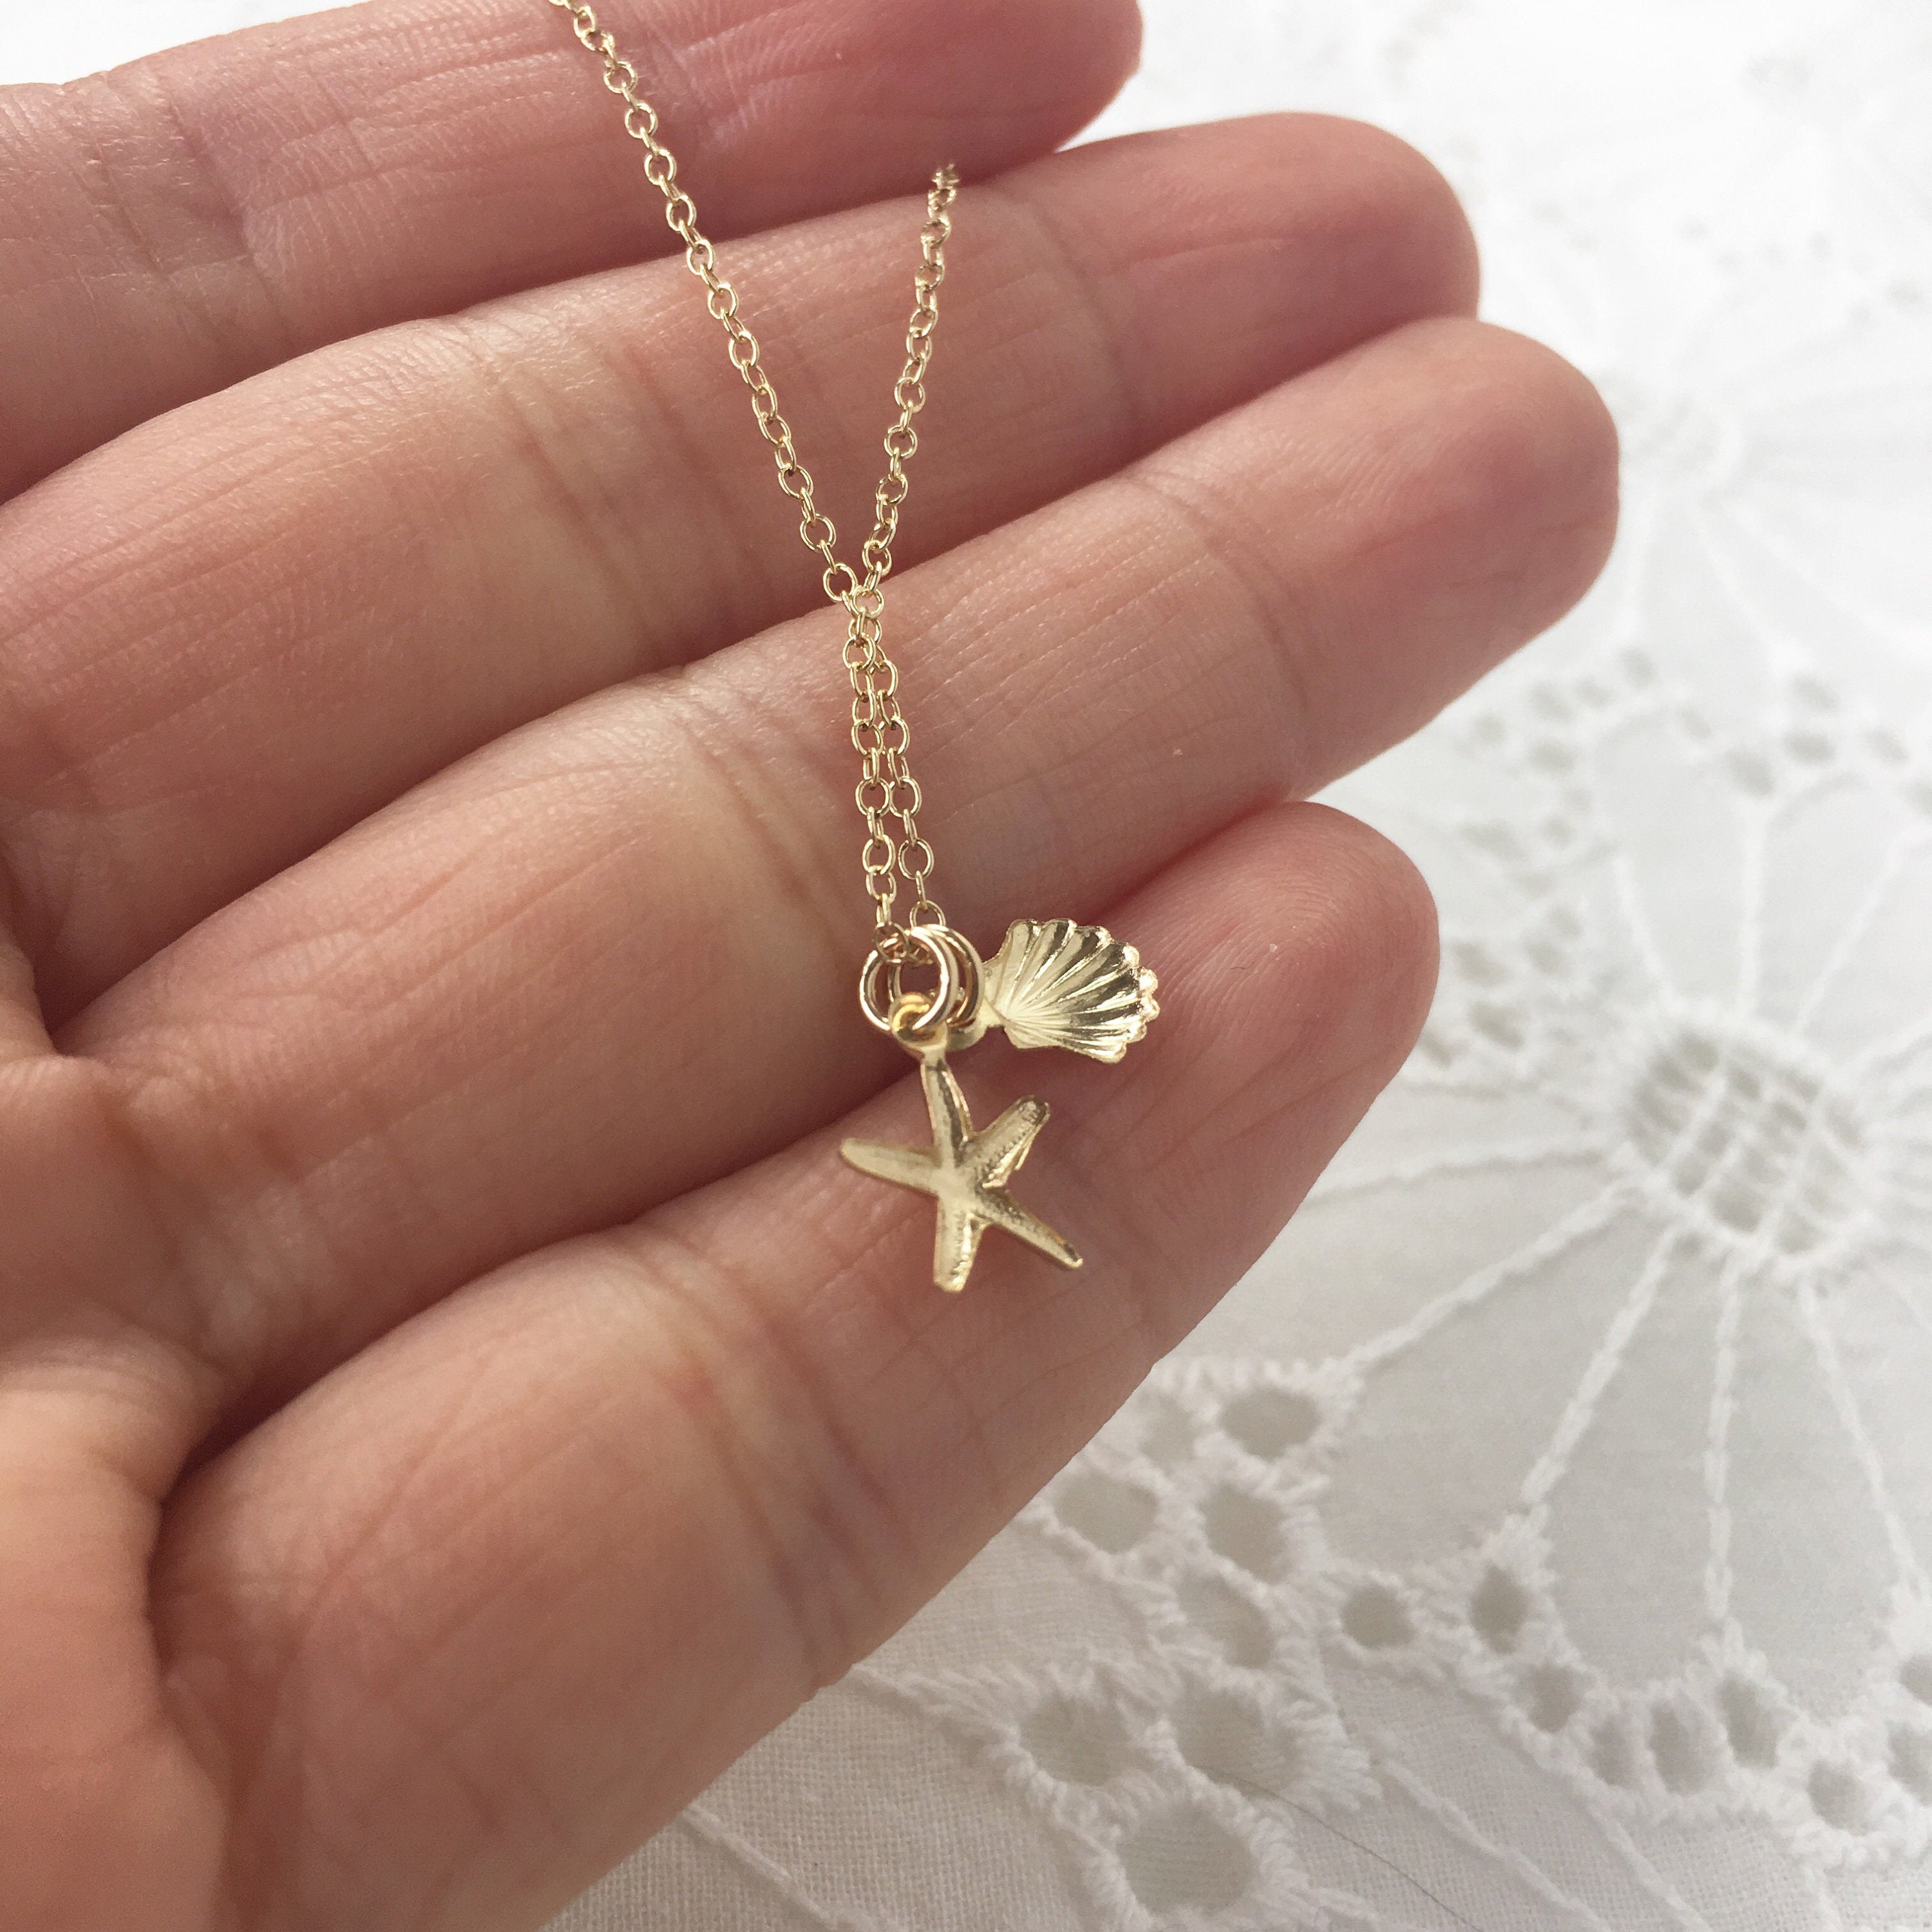 Tiny Seashell Necklace - gold filled seashell necklace, shell necklace, seashell pendant, beachy necklace, dainty necklace |GFN00044